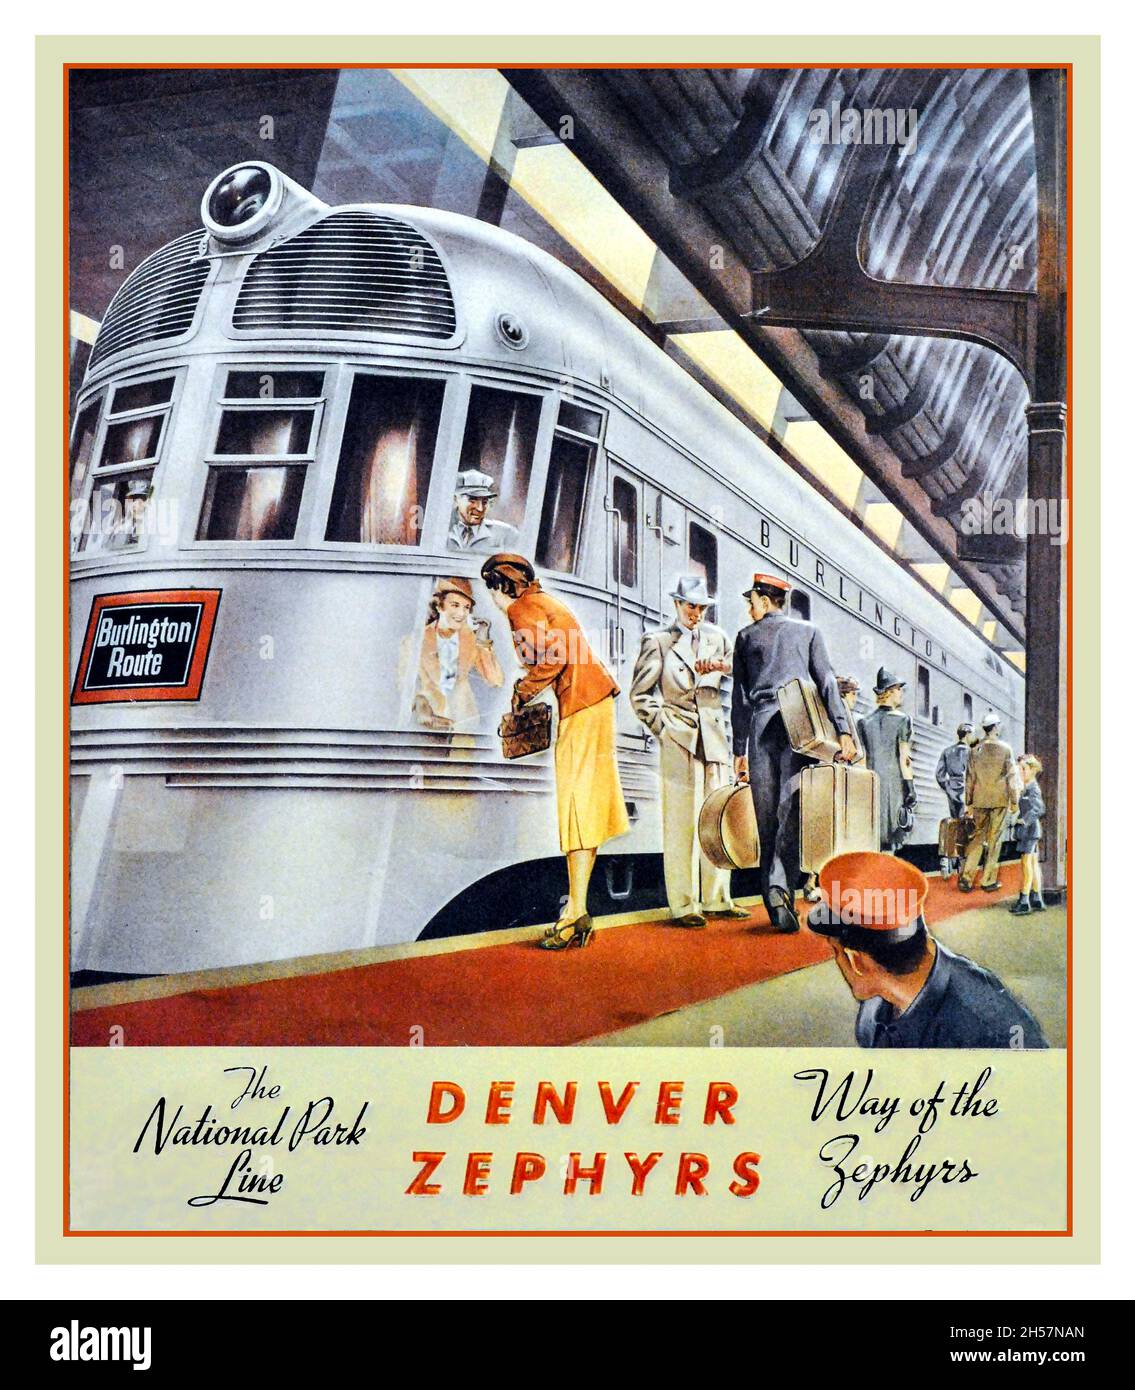 Vintage American Railway Poster 1936 advertising the Denver Zephyr on the Burlington Route emphasising the mirror-like finish of the locomotive stainless steel. Stock Photo